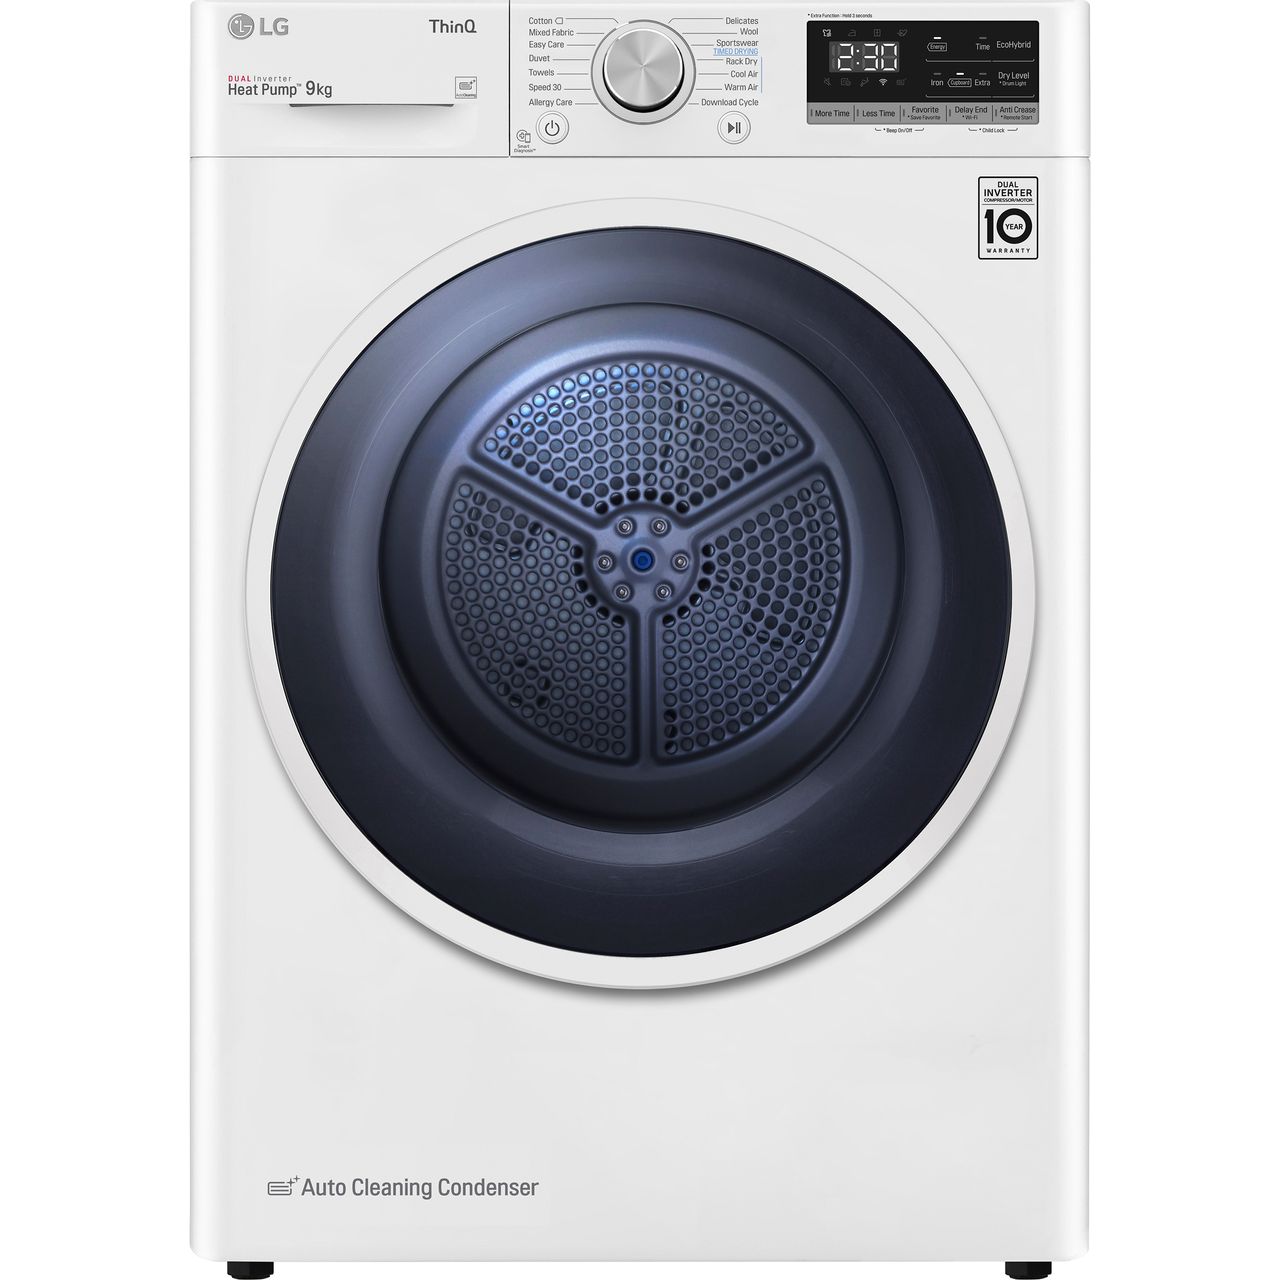 LG V3 FDV309W Wifi Connected 9Kg Heat Pump Tumble Dryer Review